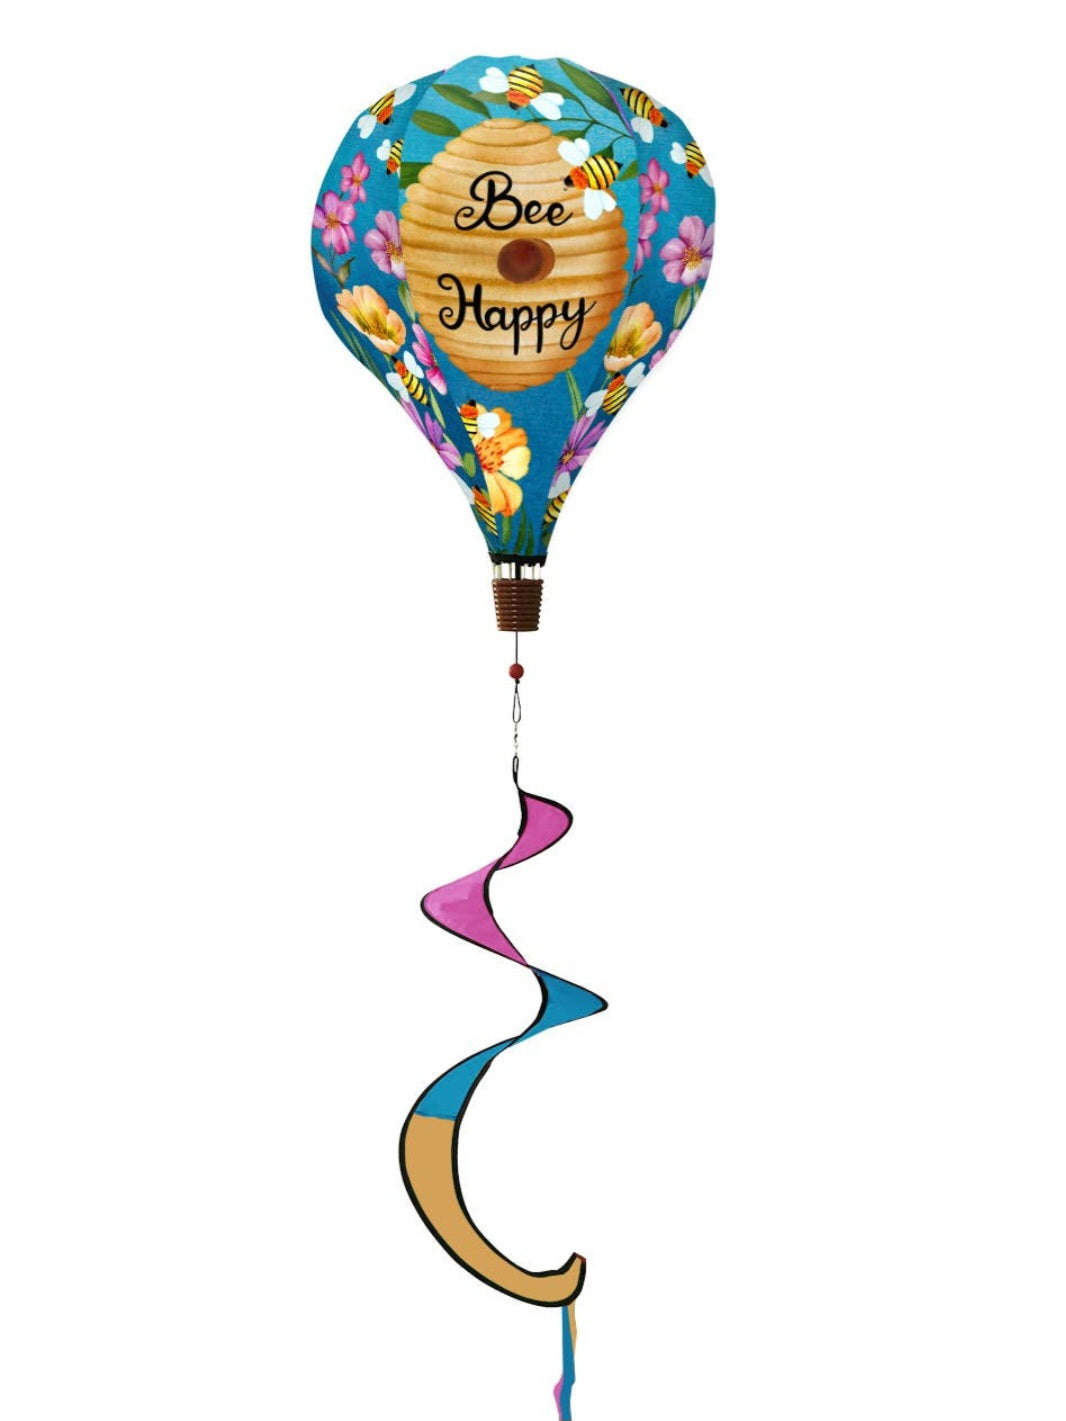 Happy Bee Hive Hot Air Balloon Wind Twister